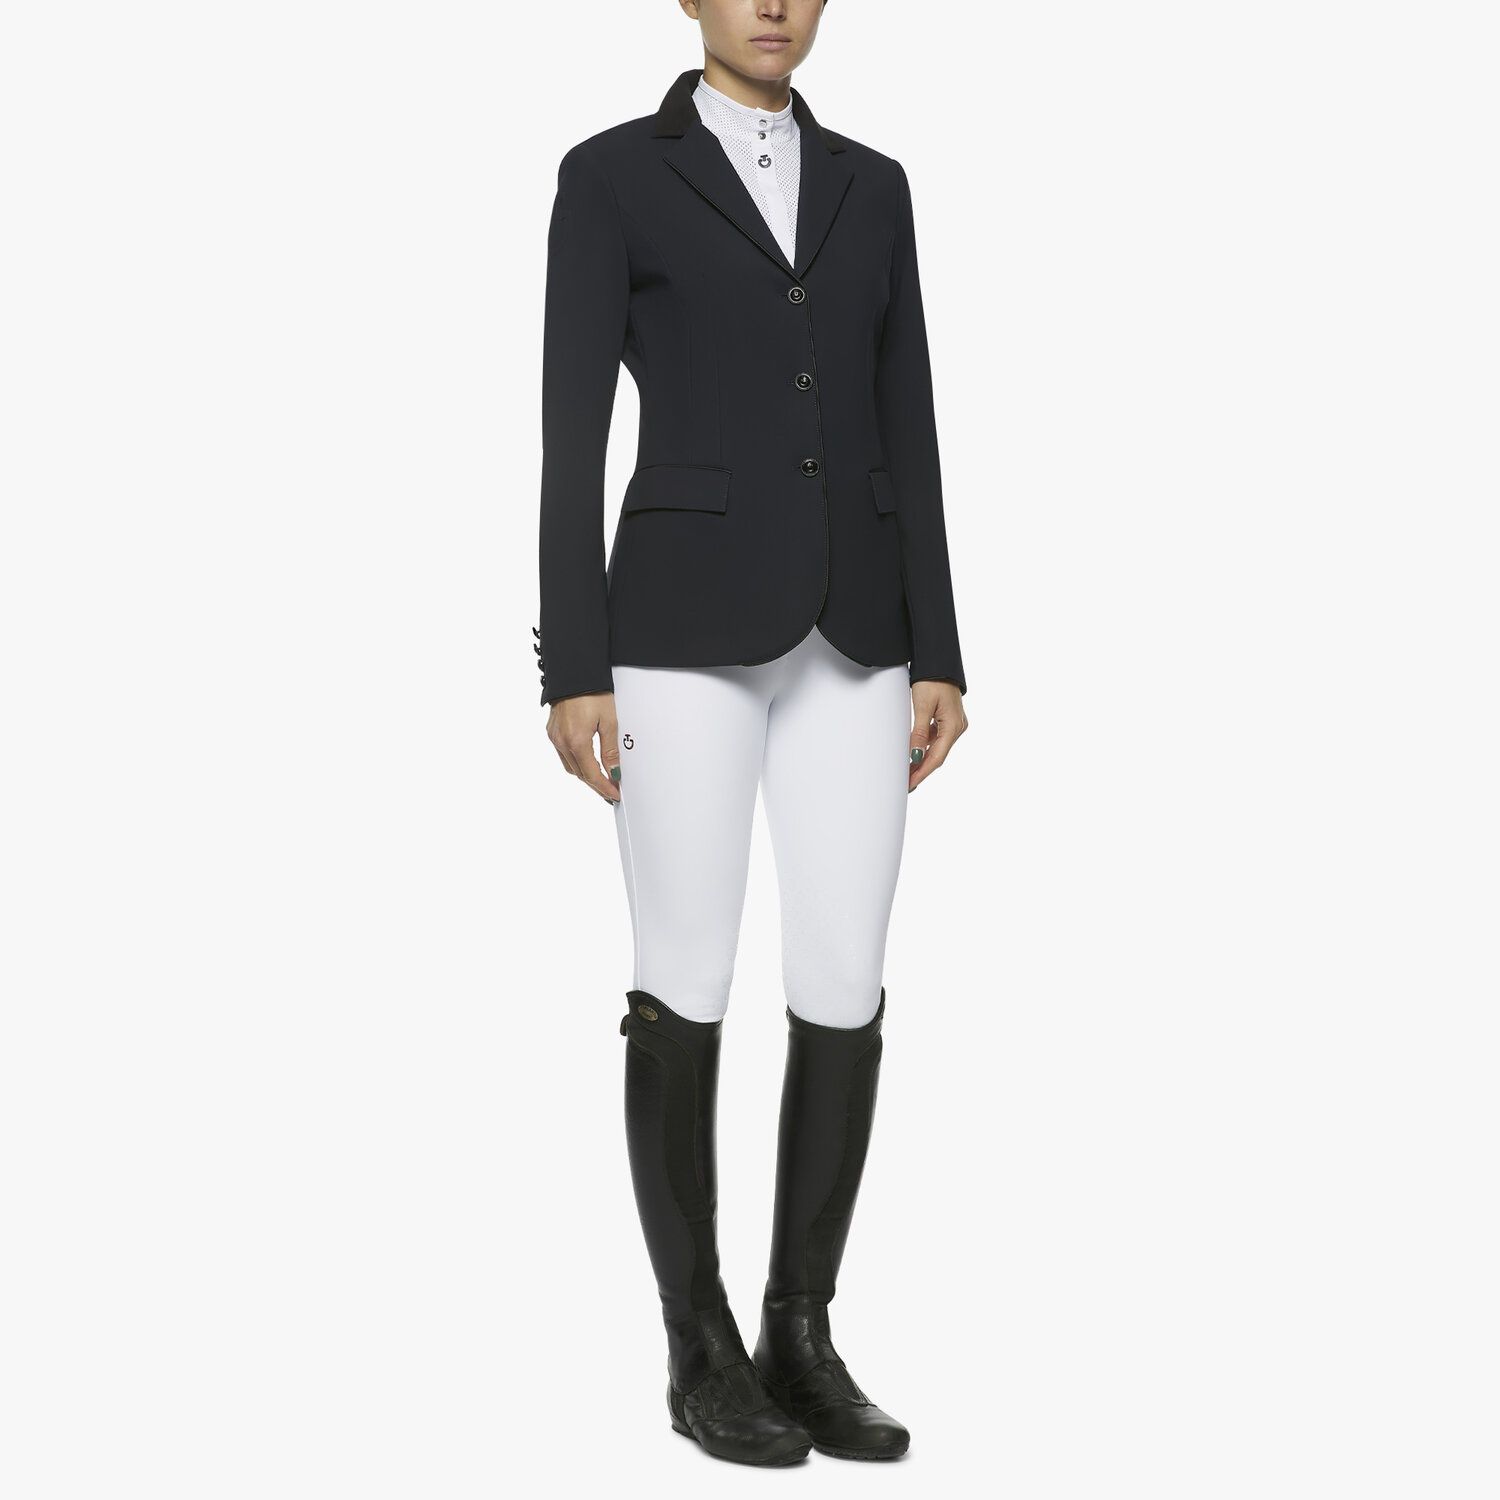 Cavalleria Toscana Women's competition riding jacket. NAVY-2